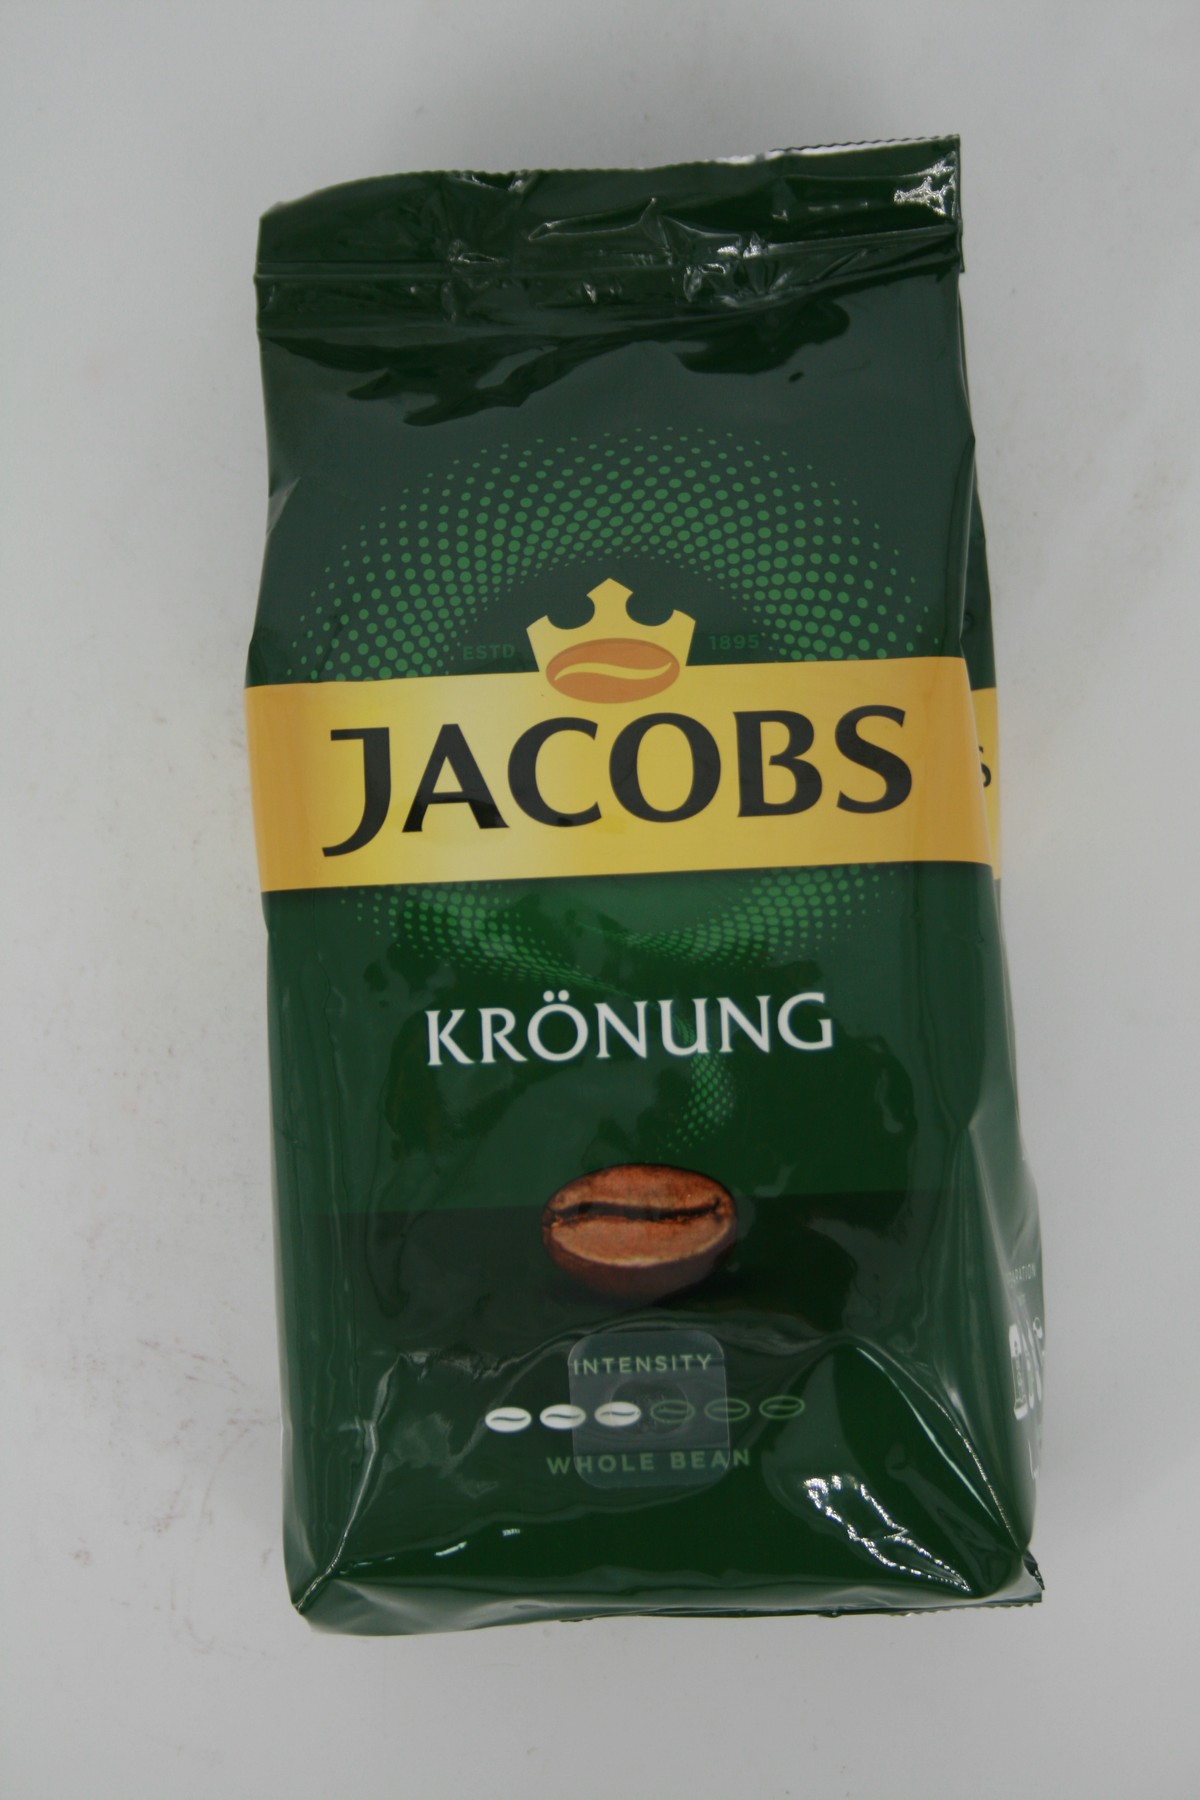 CAFEA BOABE JACOBS KRONUNG 250G # 12 buc